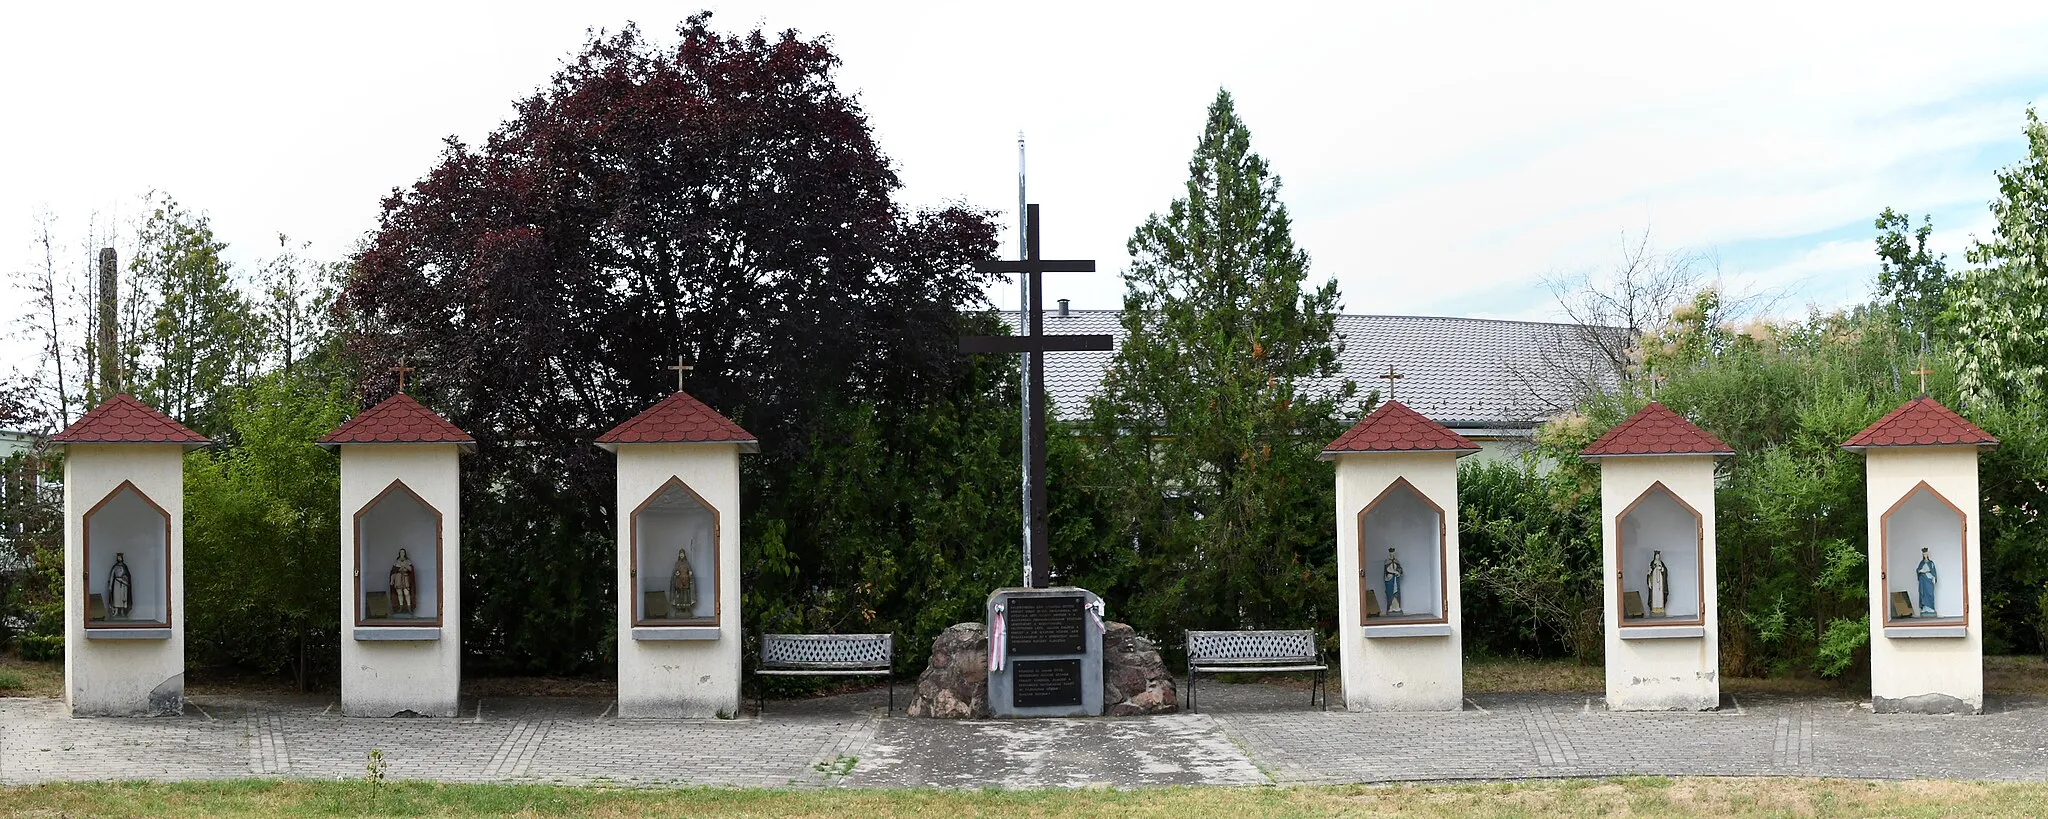 Photo showing: Statues of Hungarian saints in the Roman Catholic churchyard in Somogybabod, Hungary